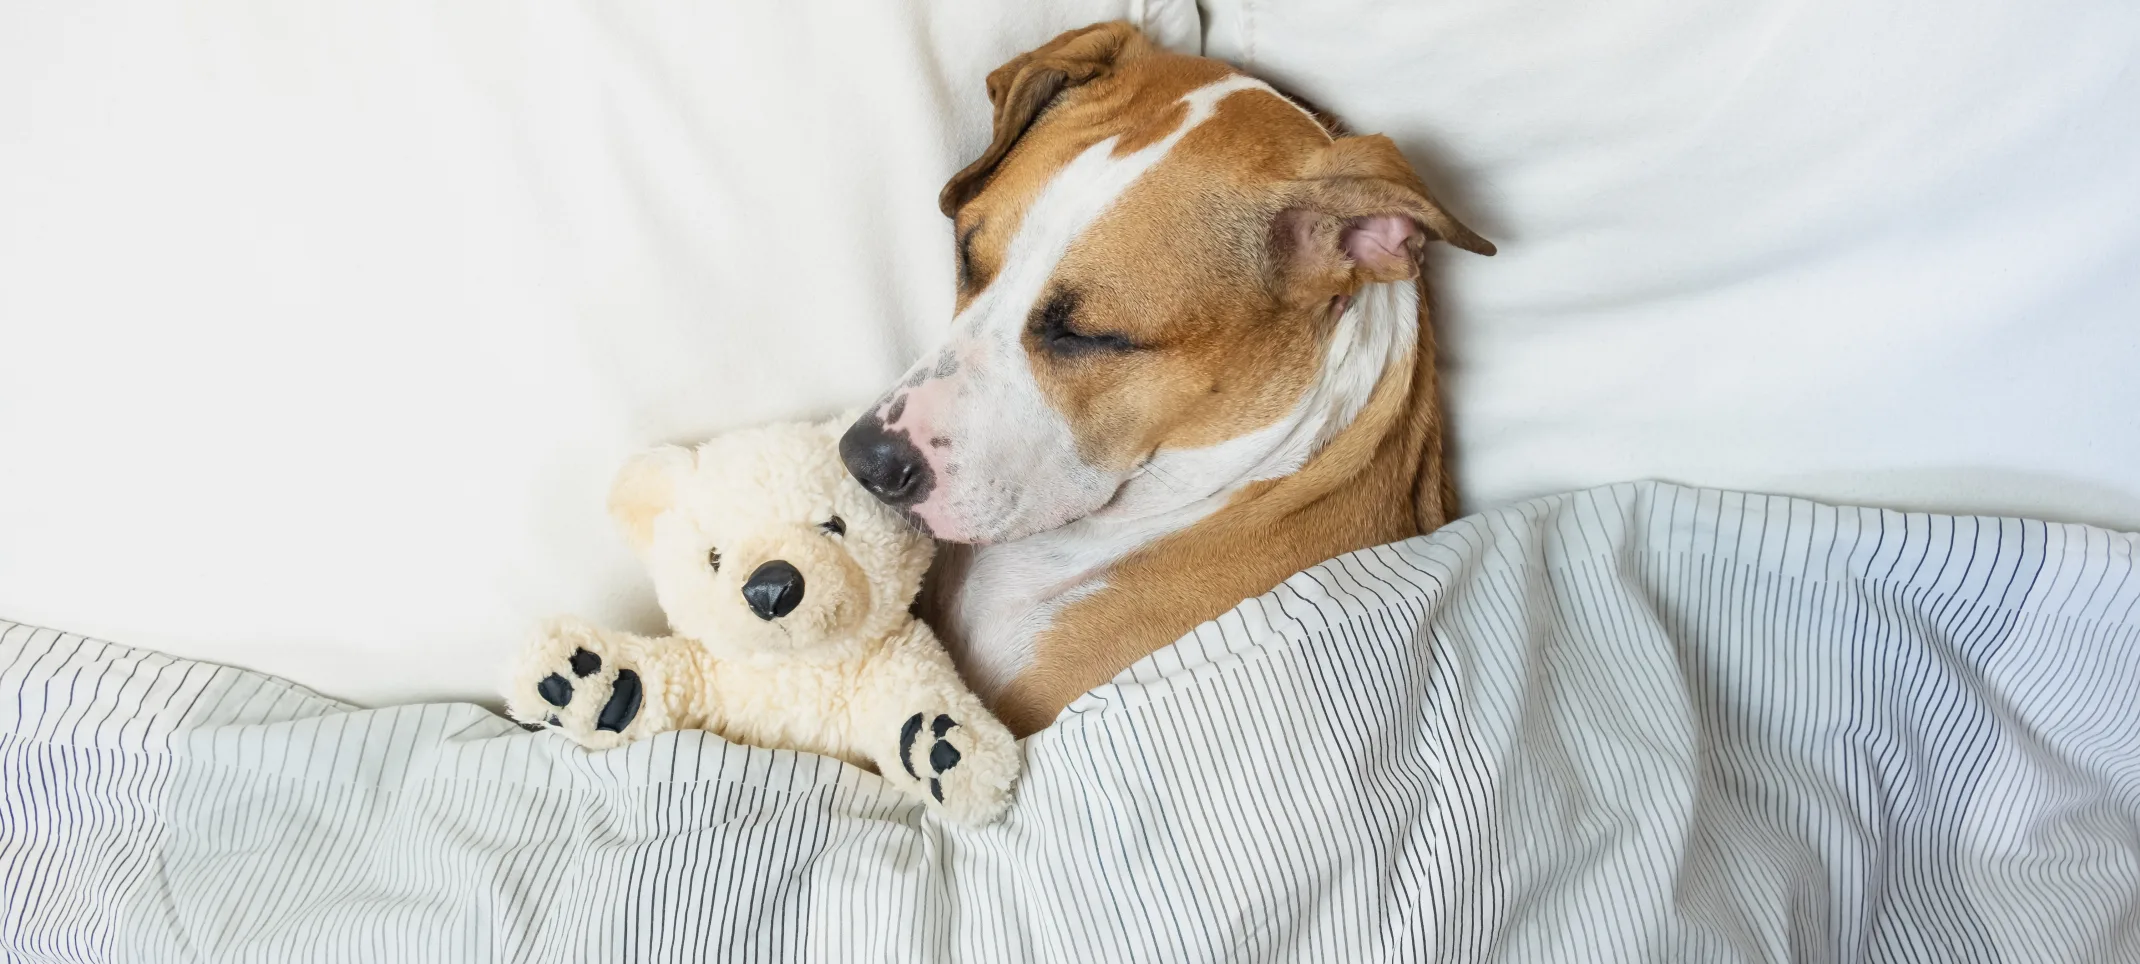 Dog in bed with stuffed animal